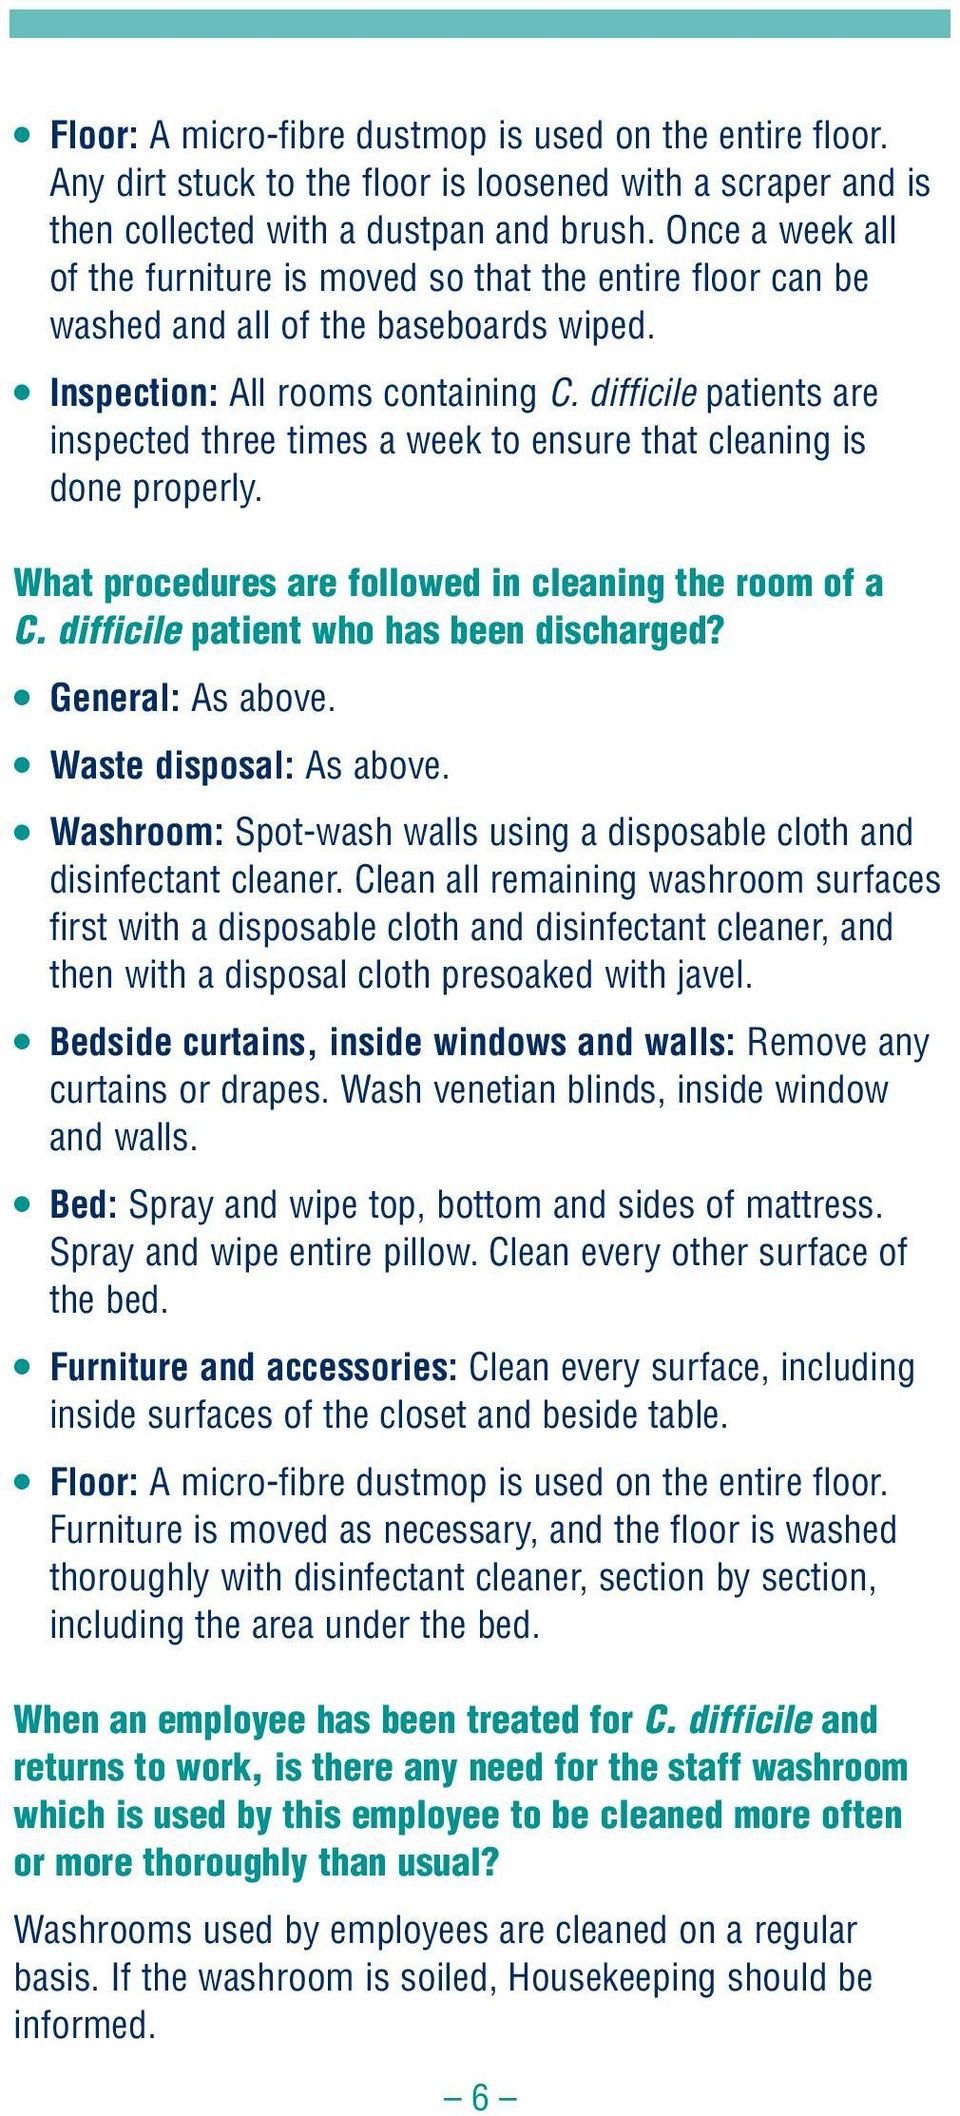 difficile patients are inspected three times a week to ensure that cleaning is done properly. What procedures are followed in cleaning the room of a C. difficile patient who has been discharged?